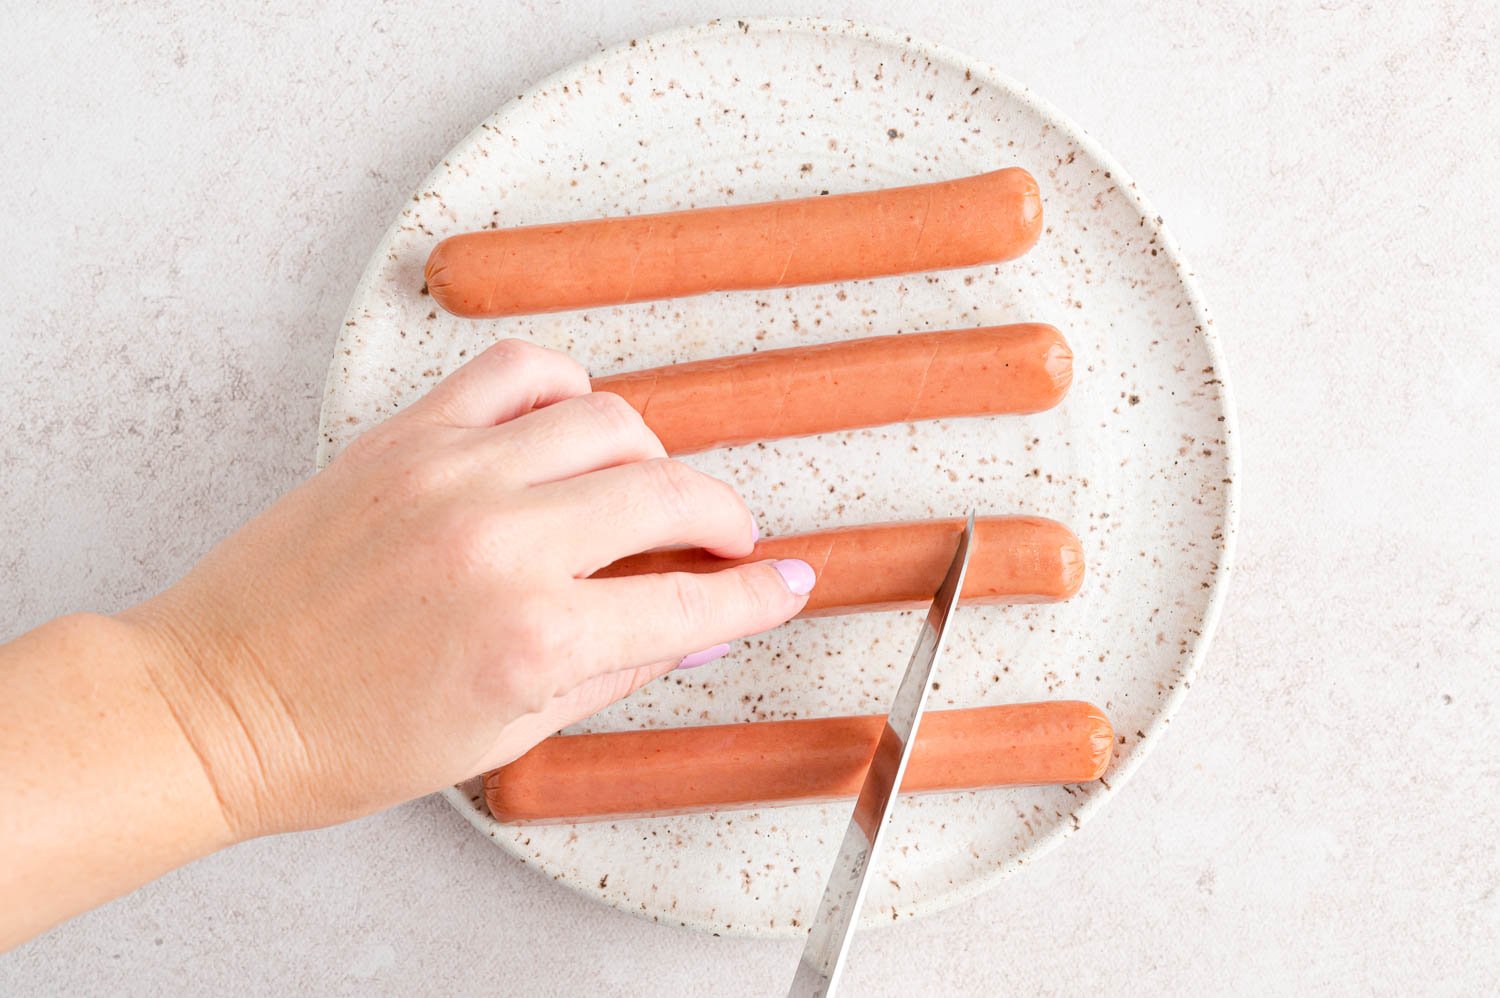 Slices being cut in a hot dog.